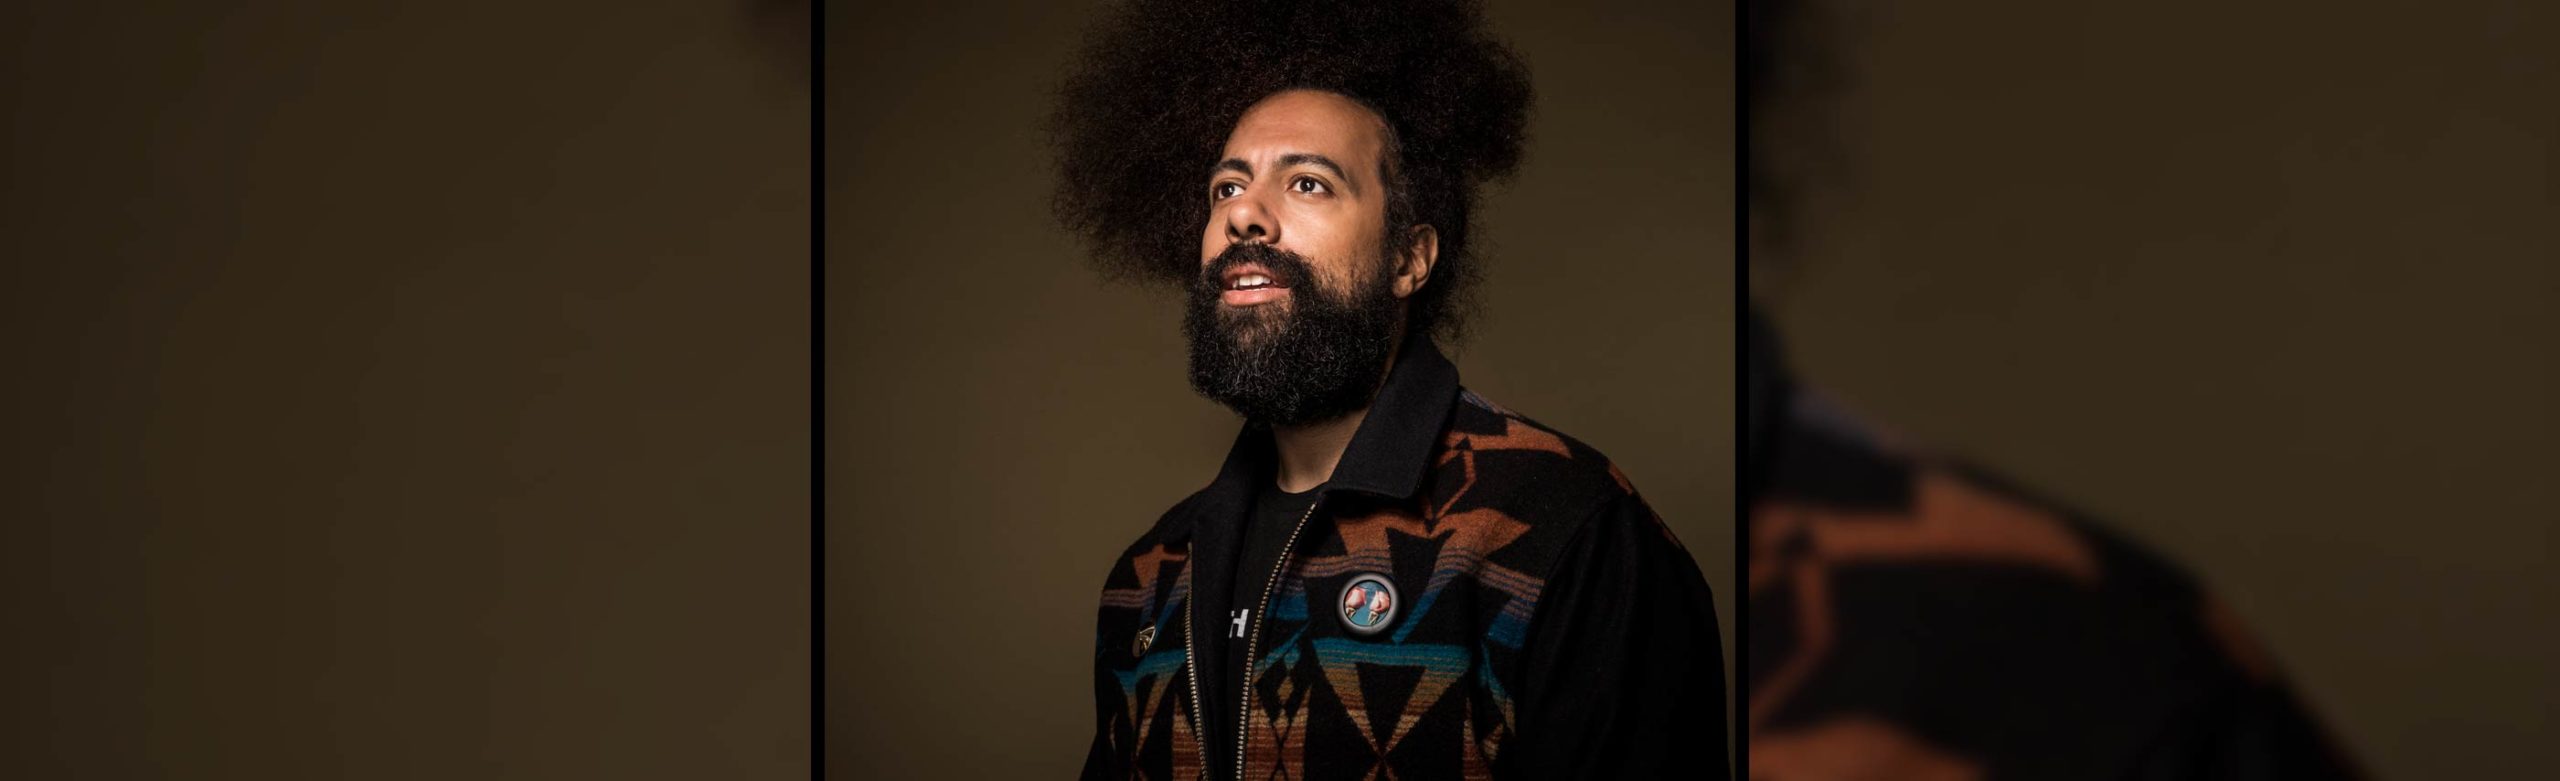 Reggie Watts Confirms Annual Holiday Shows in Bozeman and Missoula Image